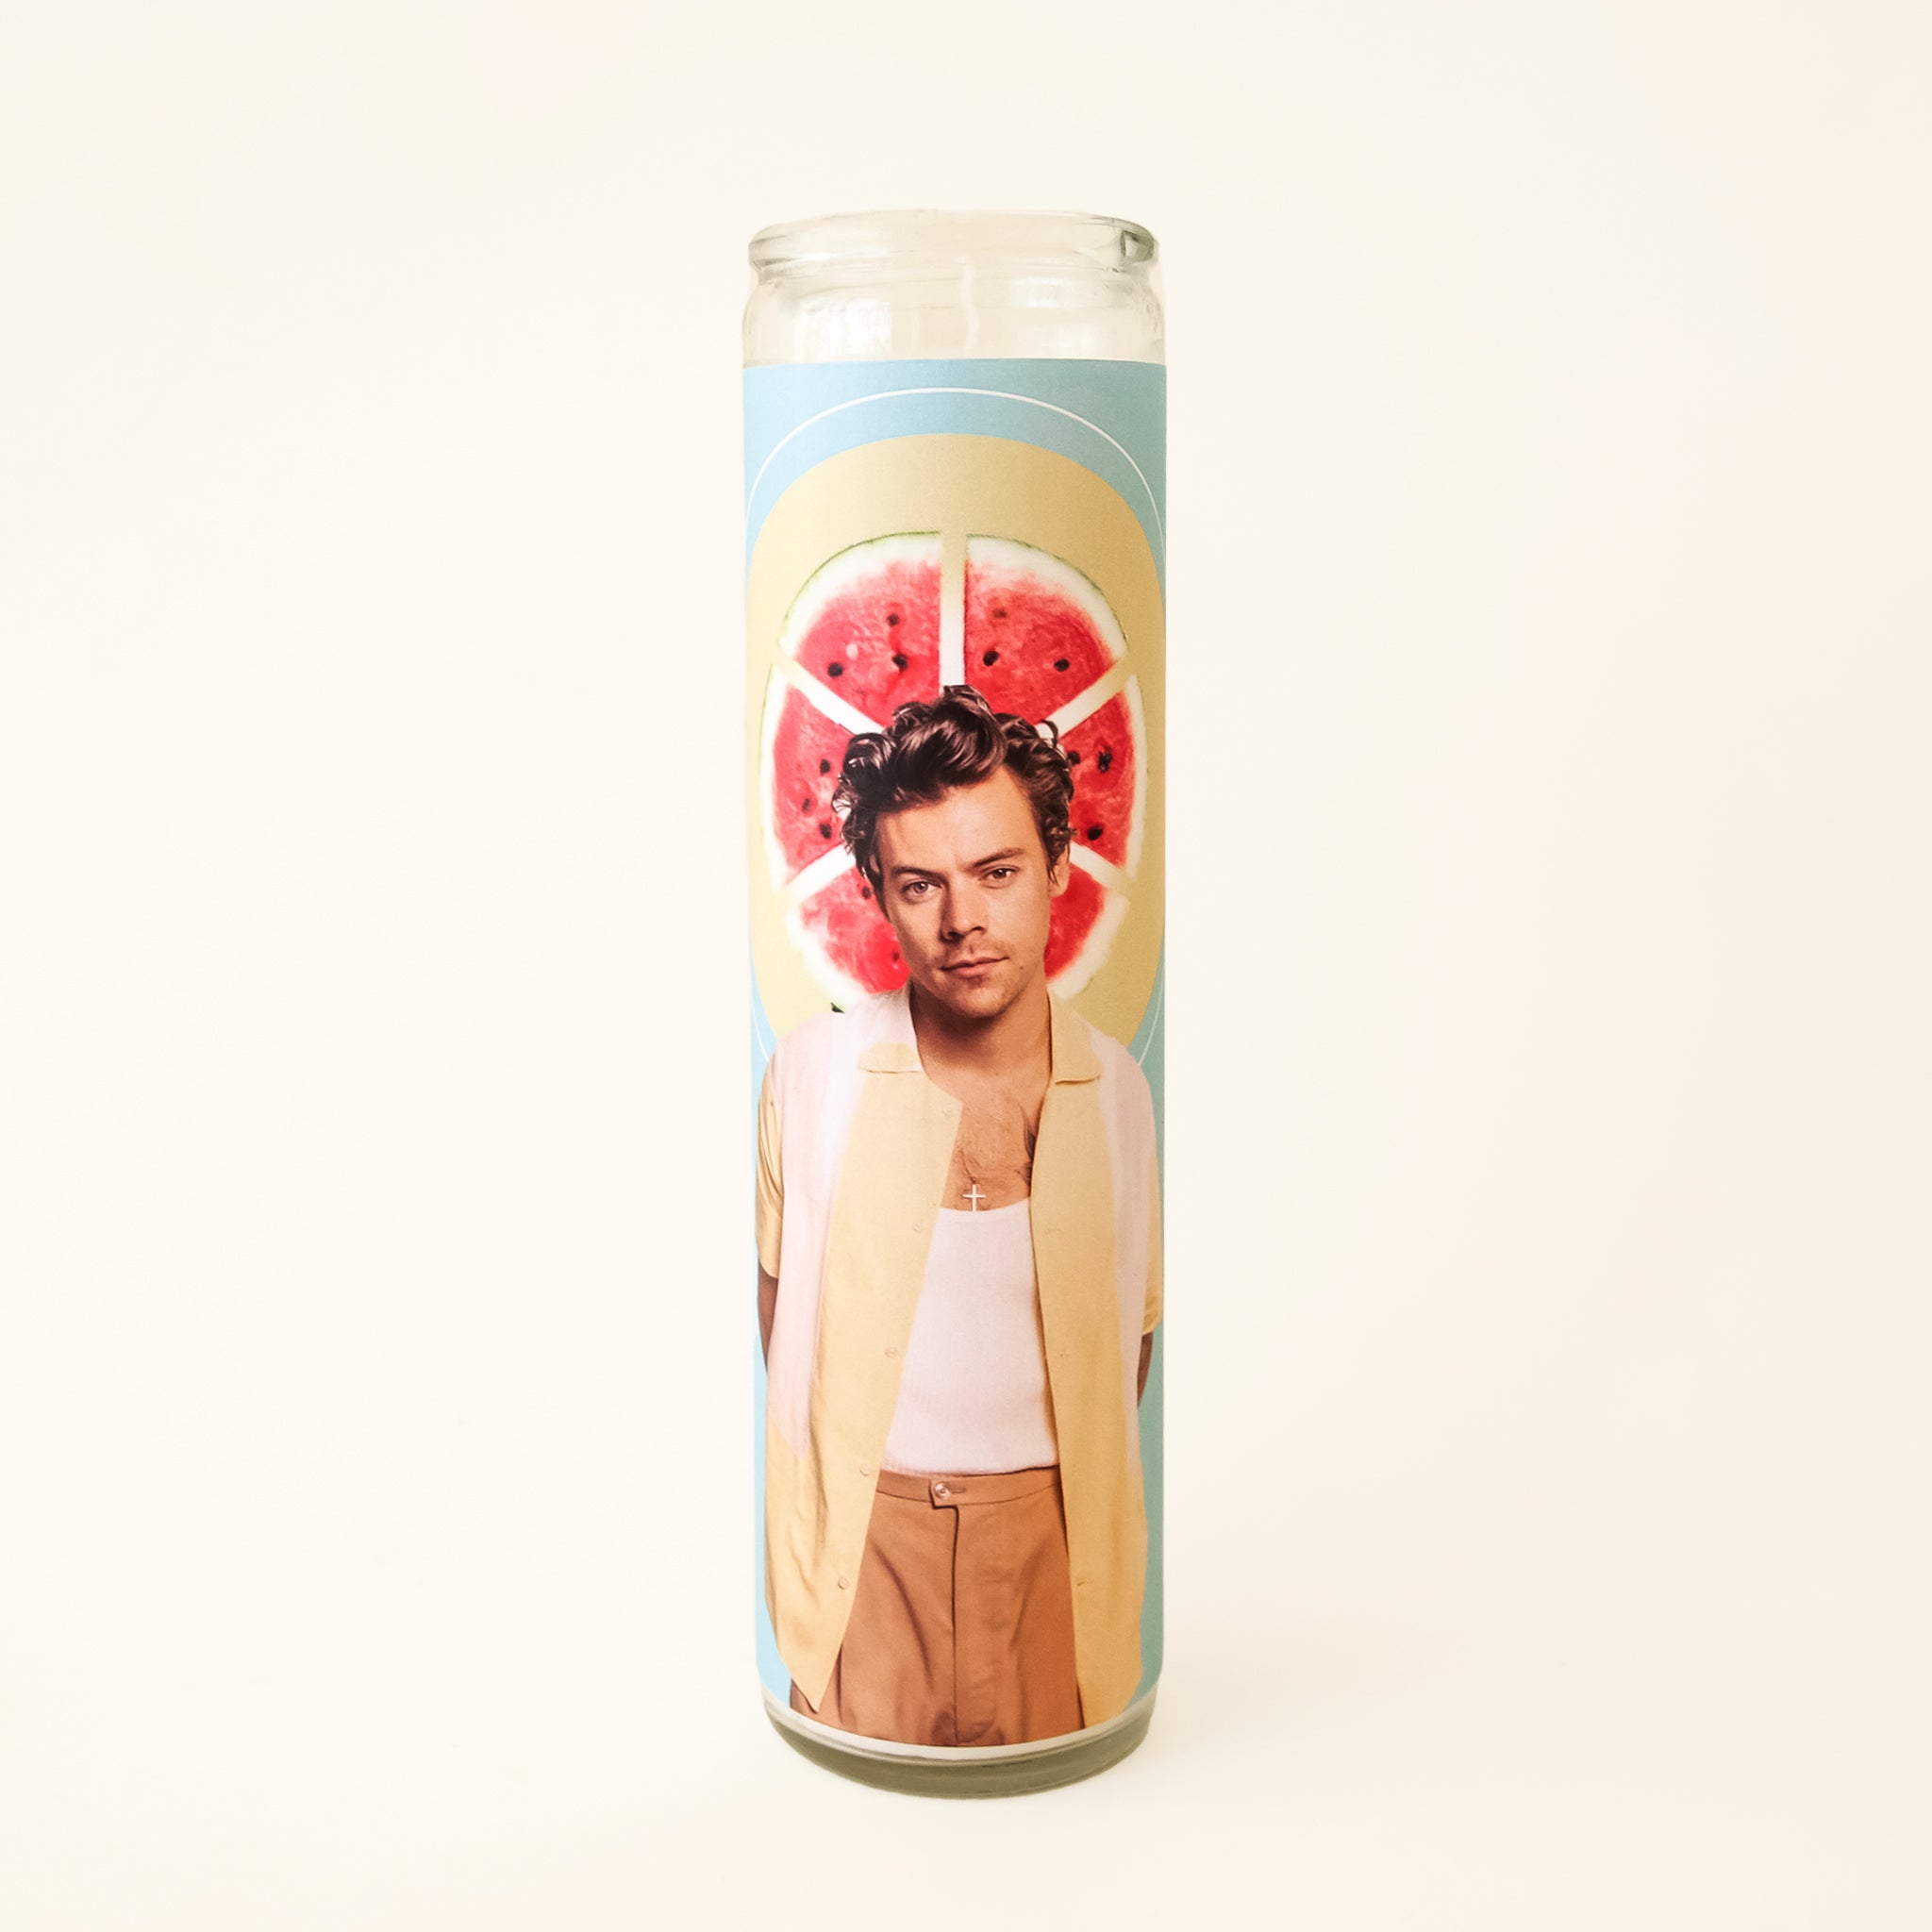 On a white background is a prayer candle with Harry Styles in front of a watermelon on the front.